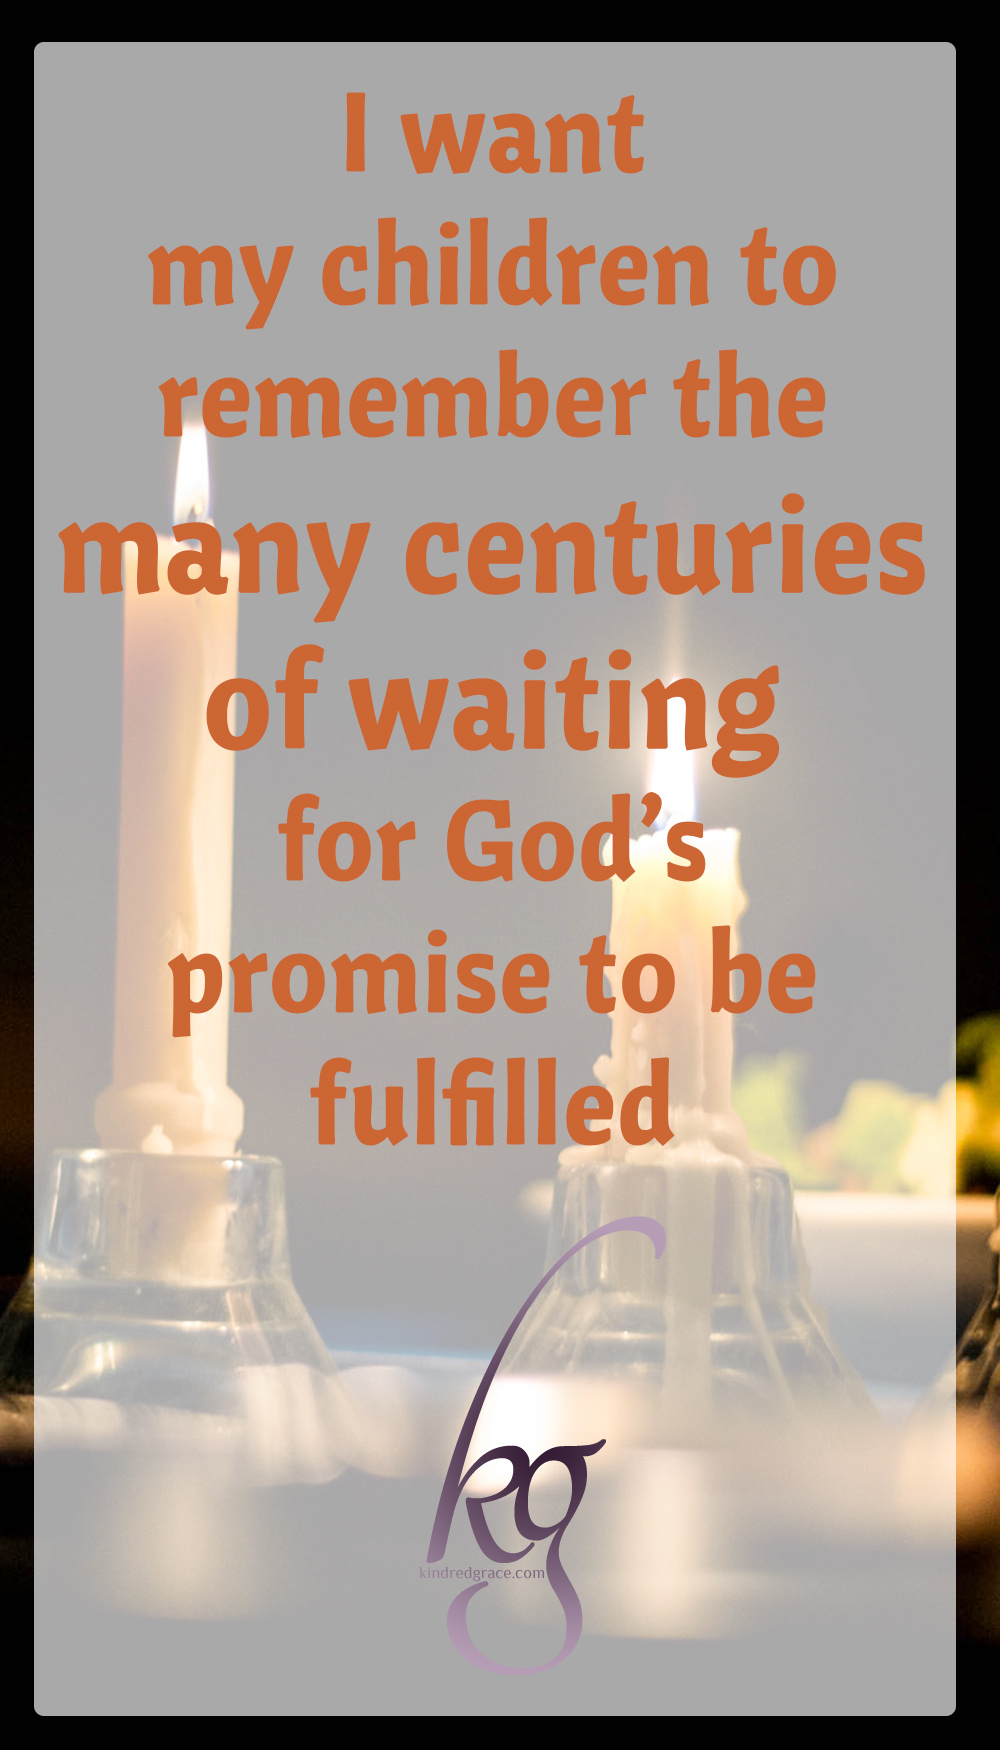 When I was a child, my family had an Advent wreath, and we would light the candles in the evenings before Christmas, singing songs and reading Scriptures that expressed the longing of our hearts for the coming Savior.

I want my children to experience that same eagerness, and to remember the many centuries of waiting for God’s promise to be fulfilled. via @KindredGrace